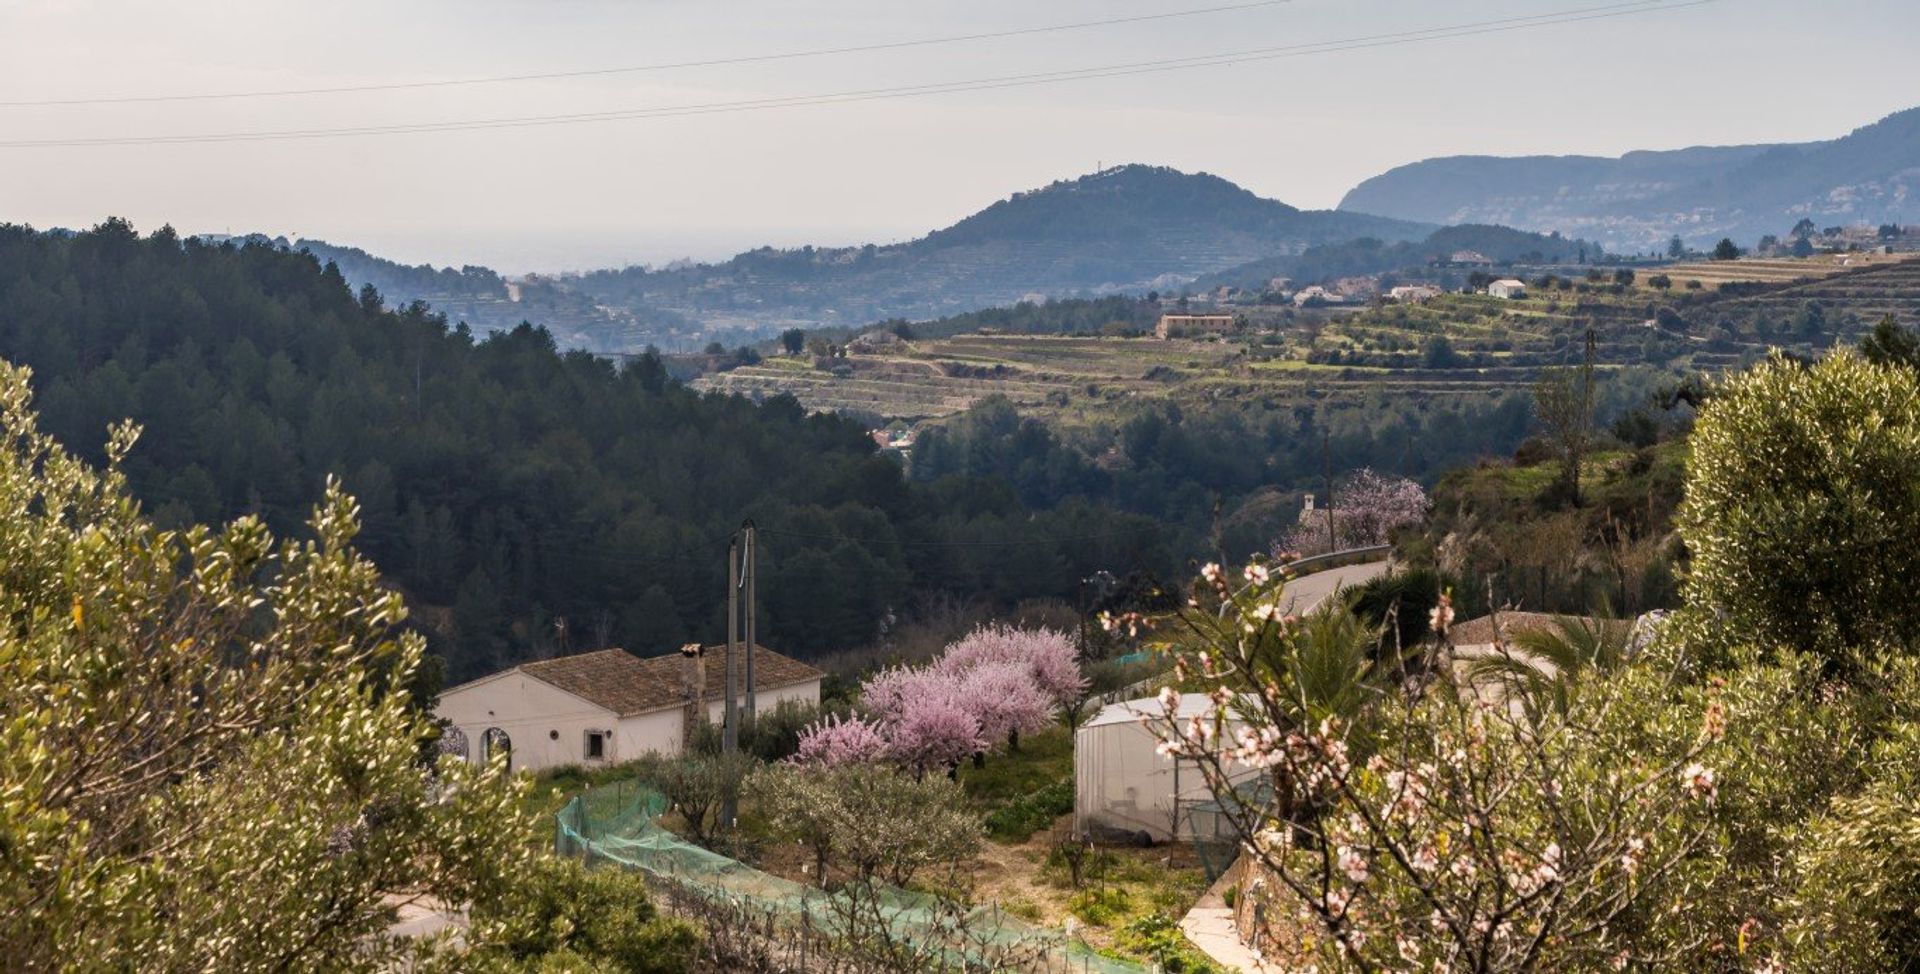 Benissa's rural surroundings are perfect for outdoor adventures by foot or bike